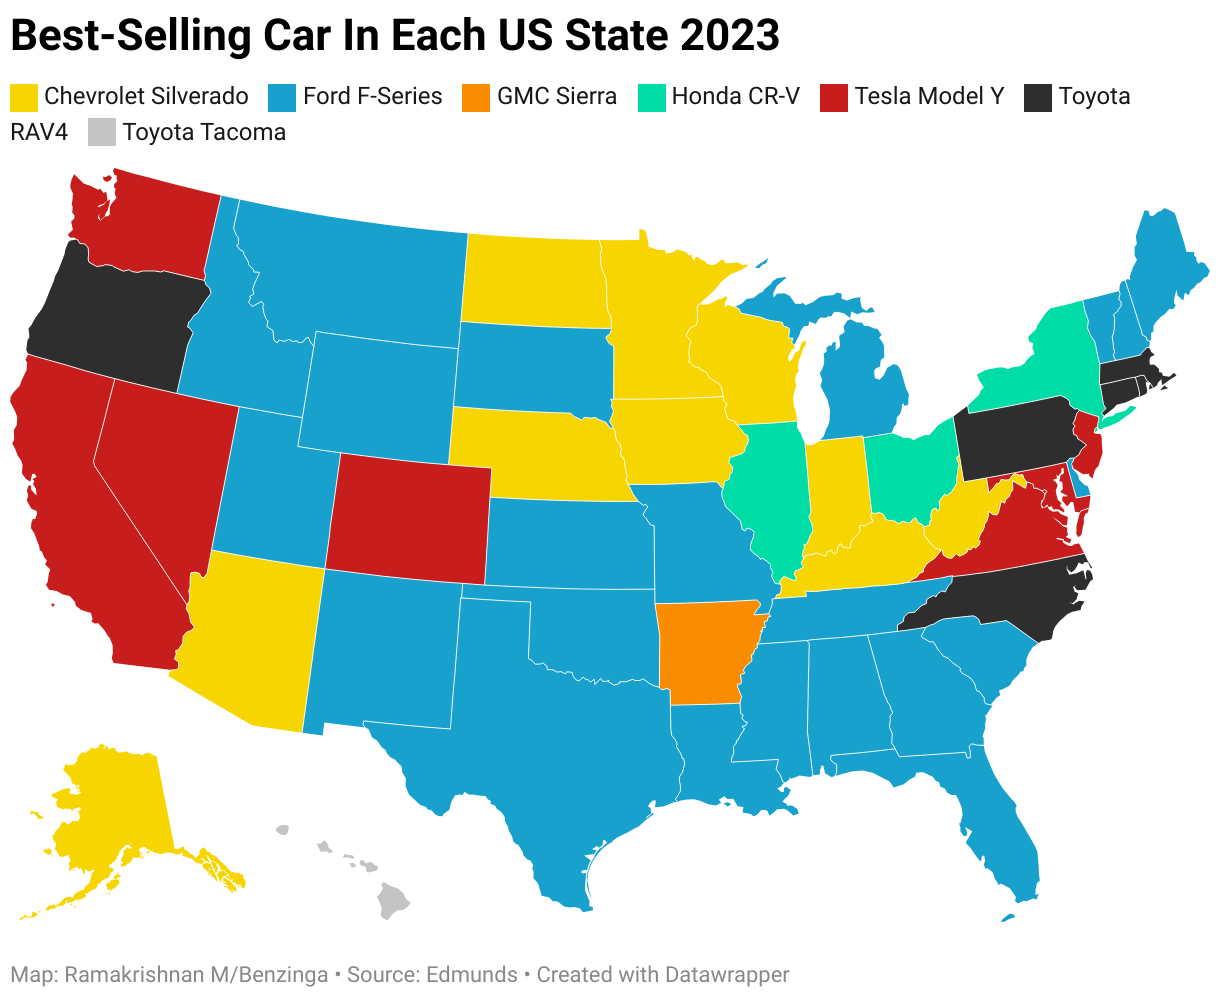 Best-Selling Car In Each US State 2023